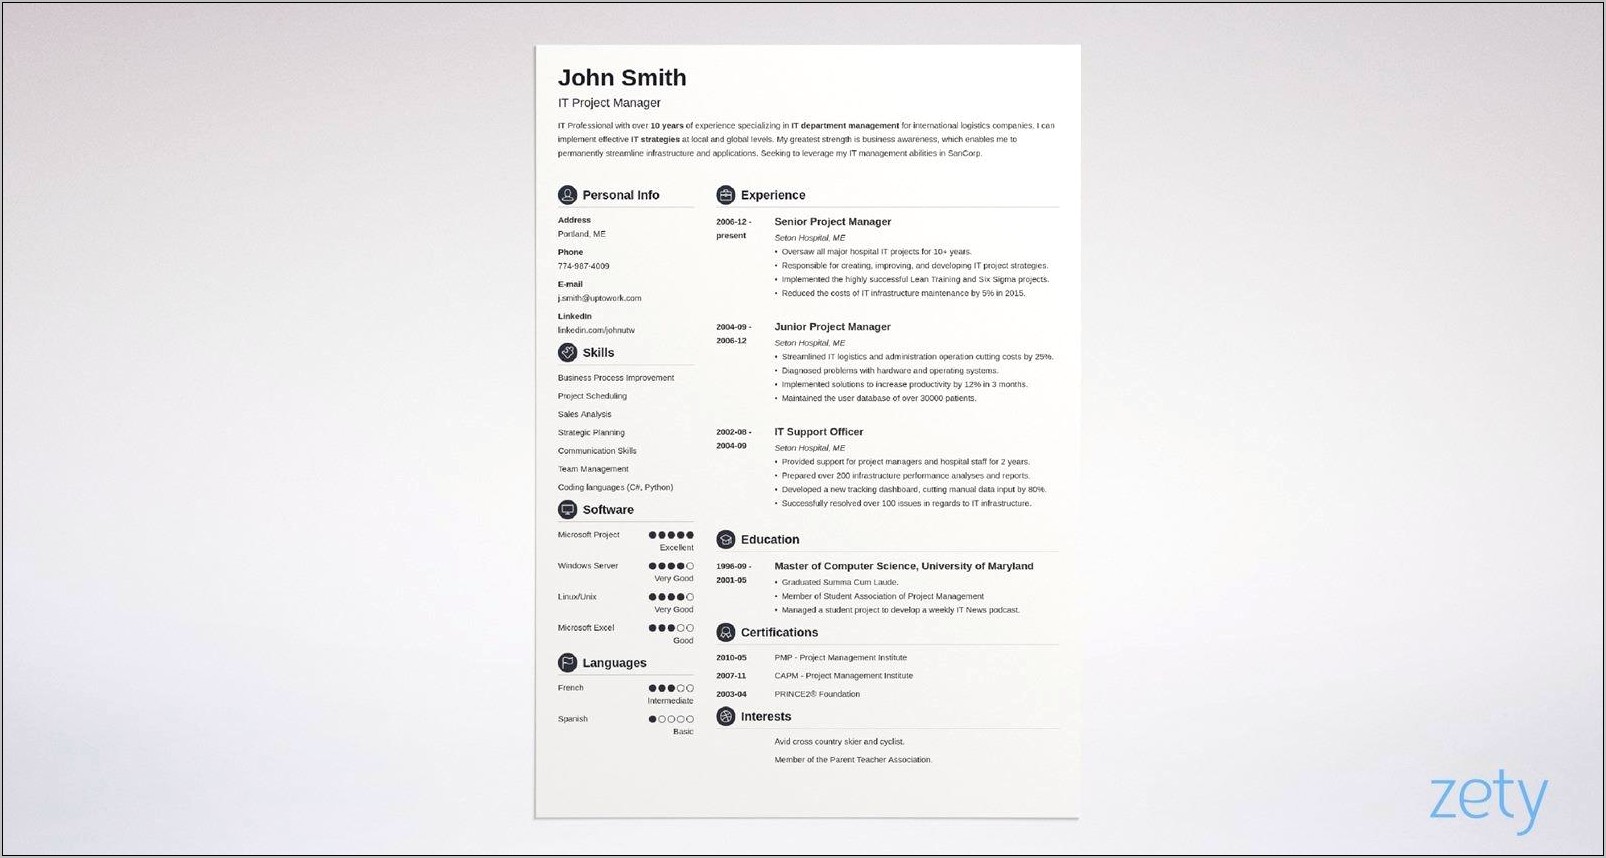 Blank Resume For Book Project Word